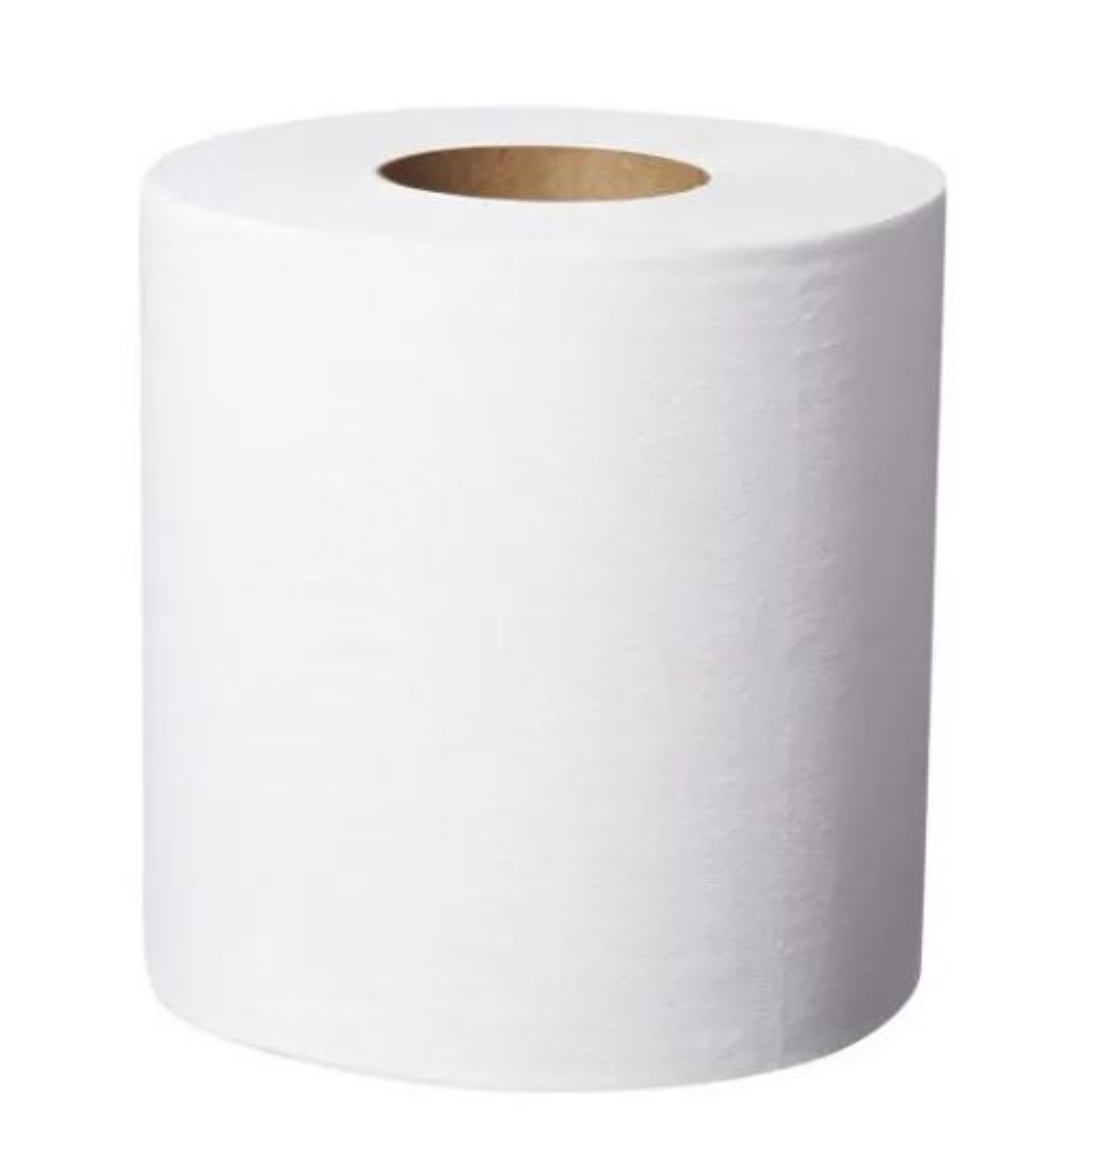 Picture of TORK CENTRE FEED PAPER TOWEL - 1PLY x 300m x 1